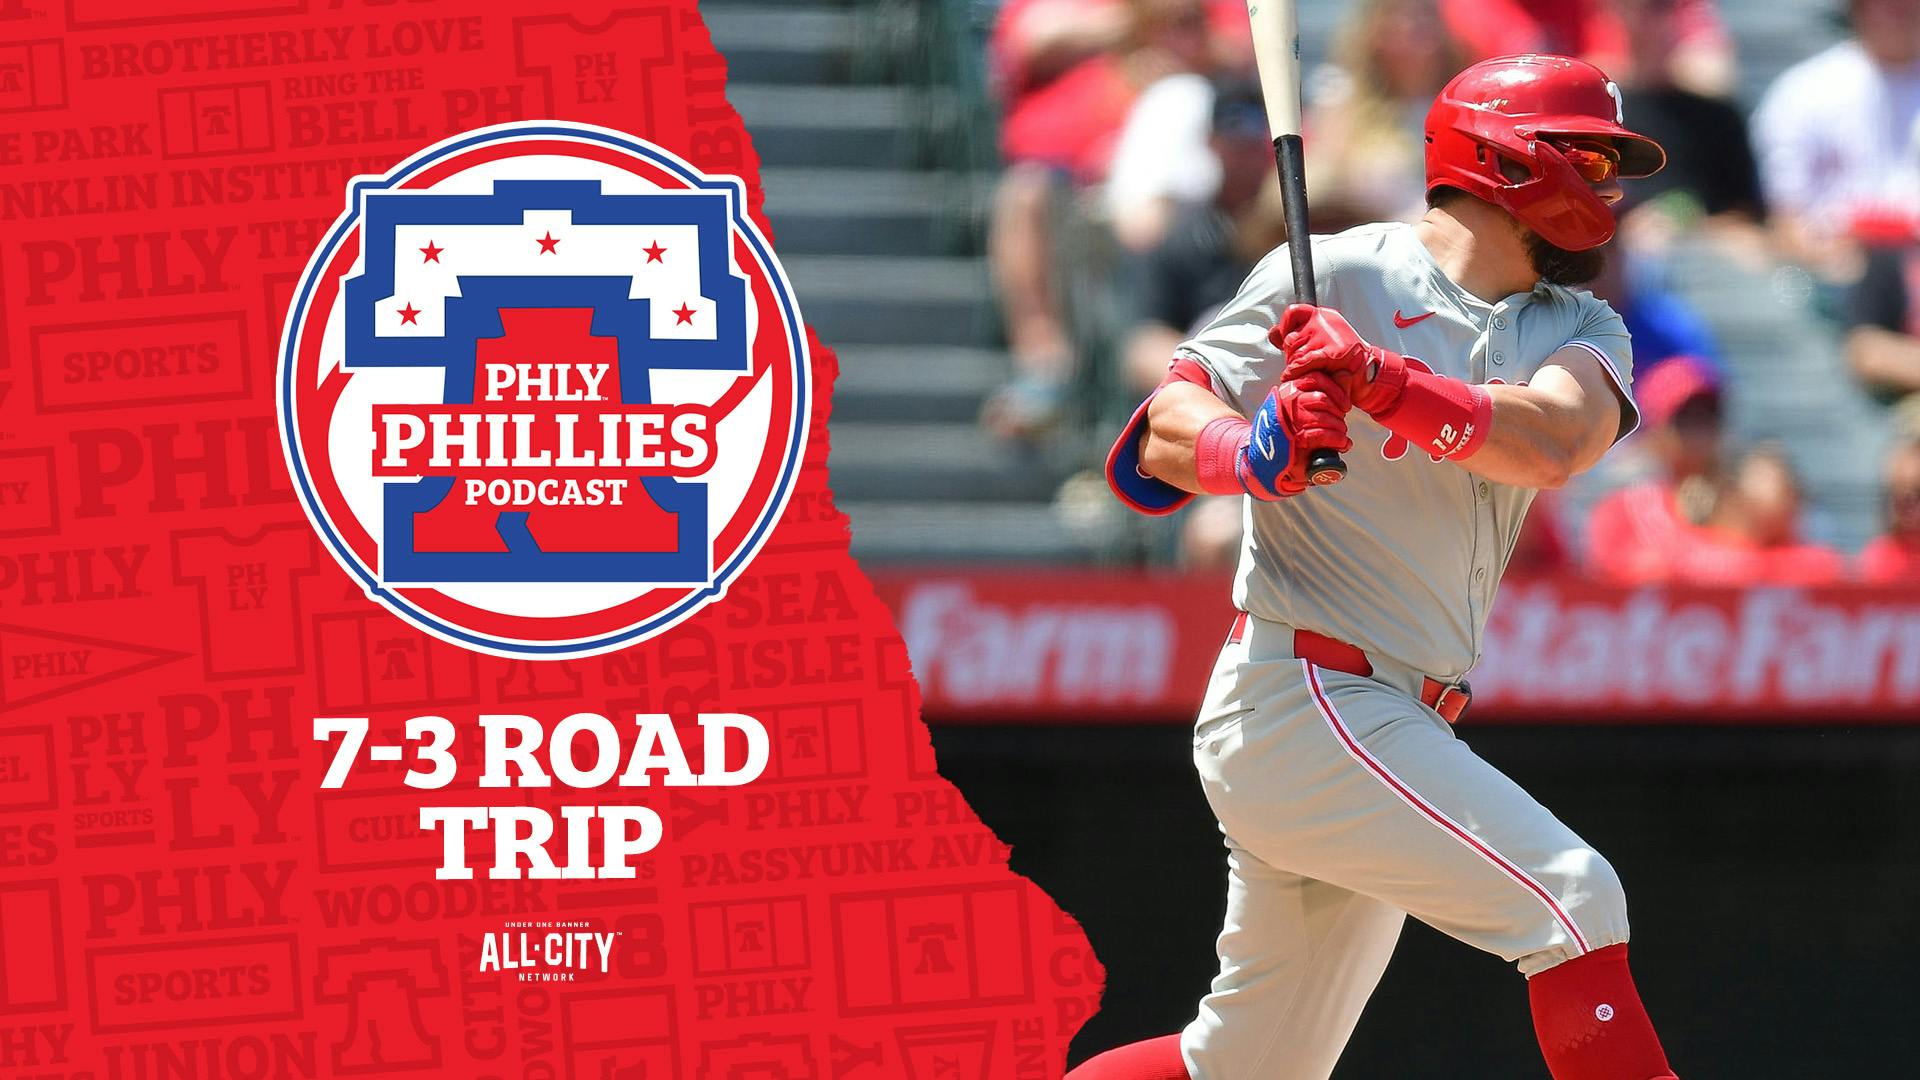 PHLY Phillies Podcast | Zack Wheeler battles through 5 innings, Phillies hold on to take 2 of 3 vs Angels, road trip ends7-3